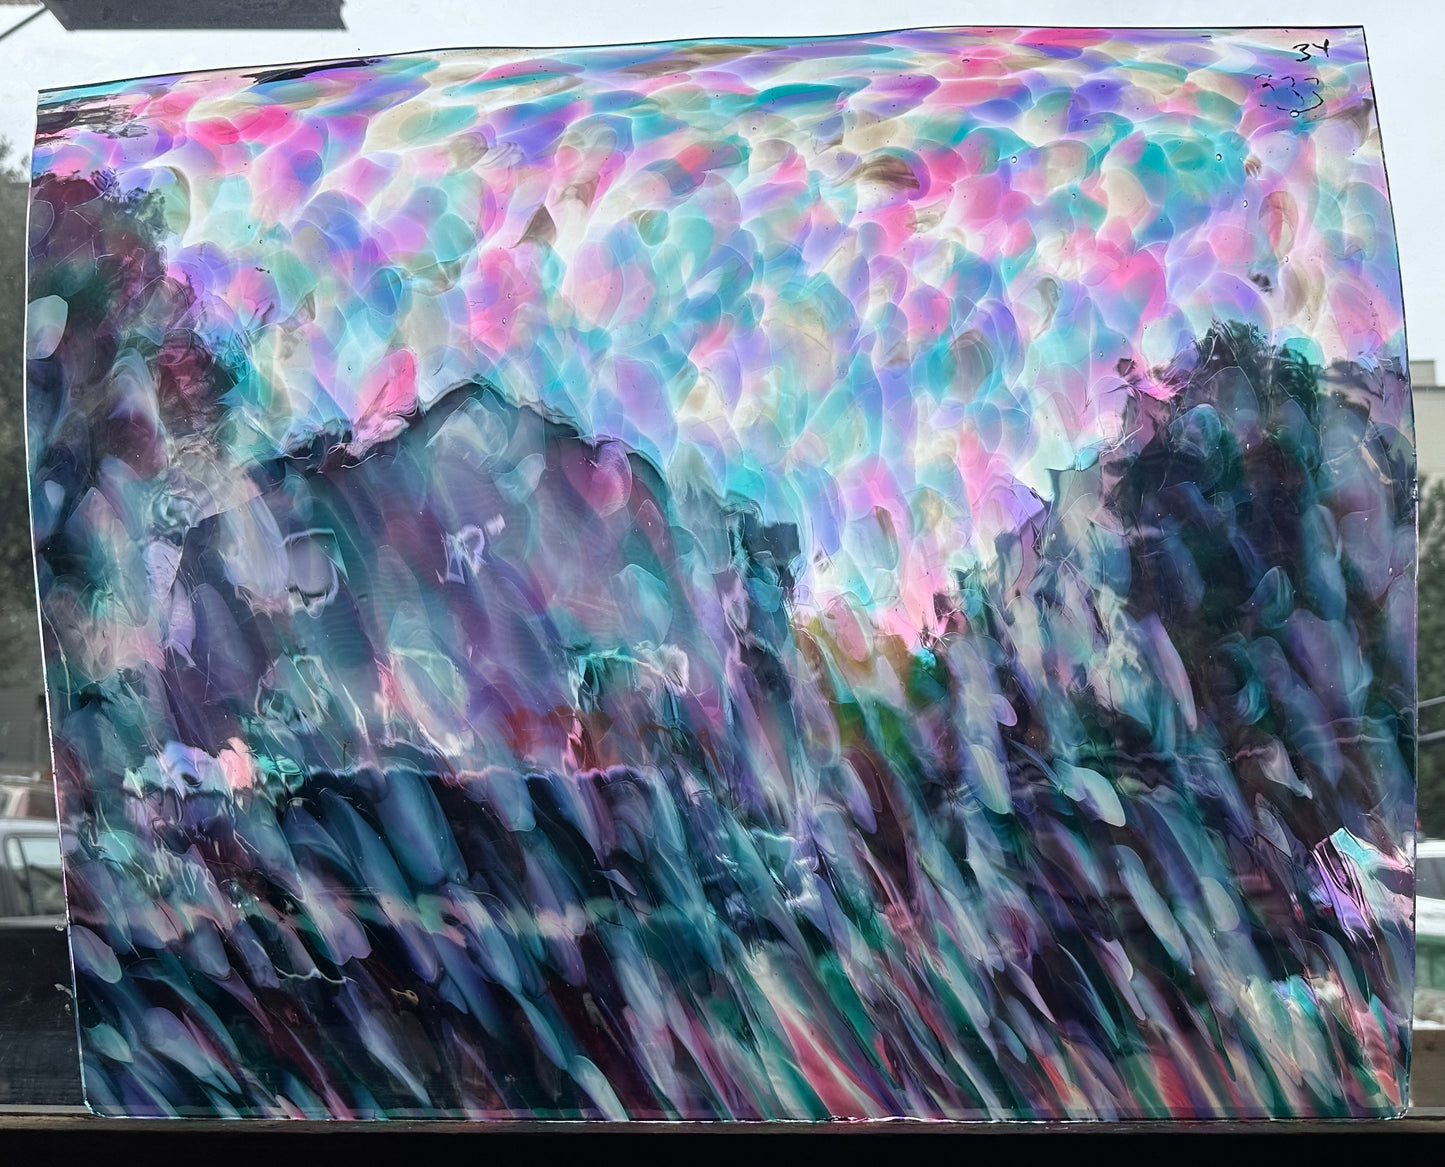 P1 333 purple/pink/teal/white on transparent